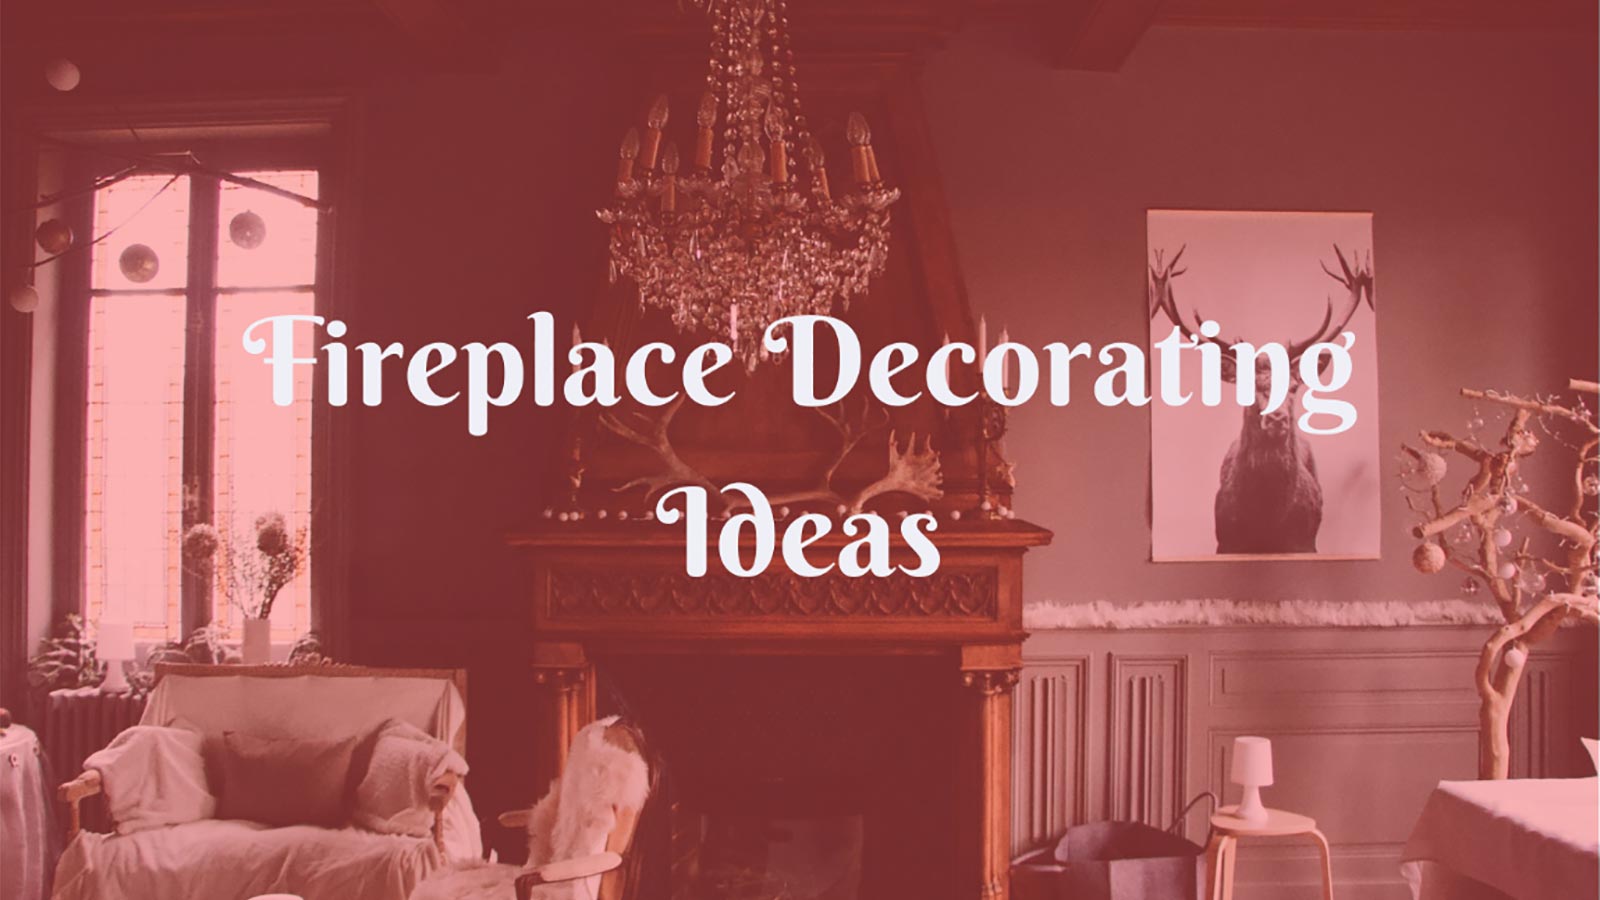 Fireplace Decorating Ideas for the Winter Season